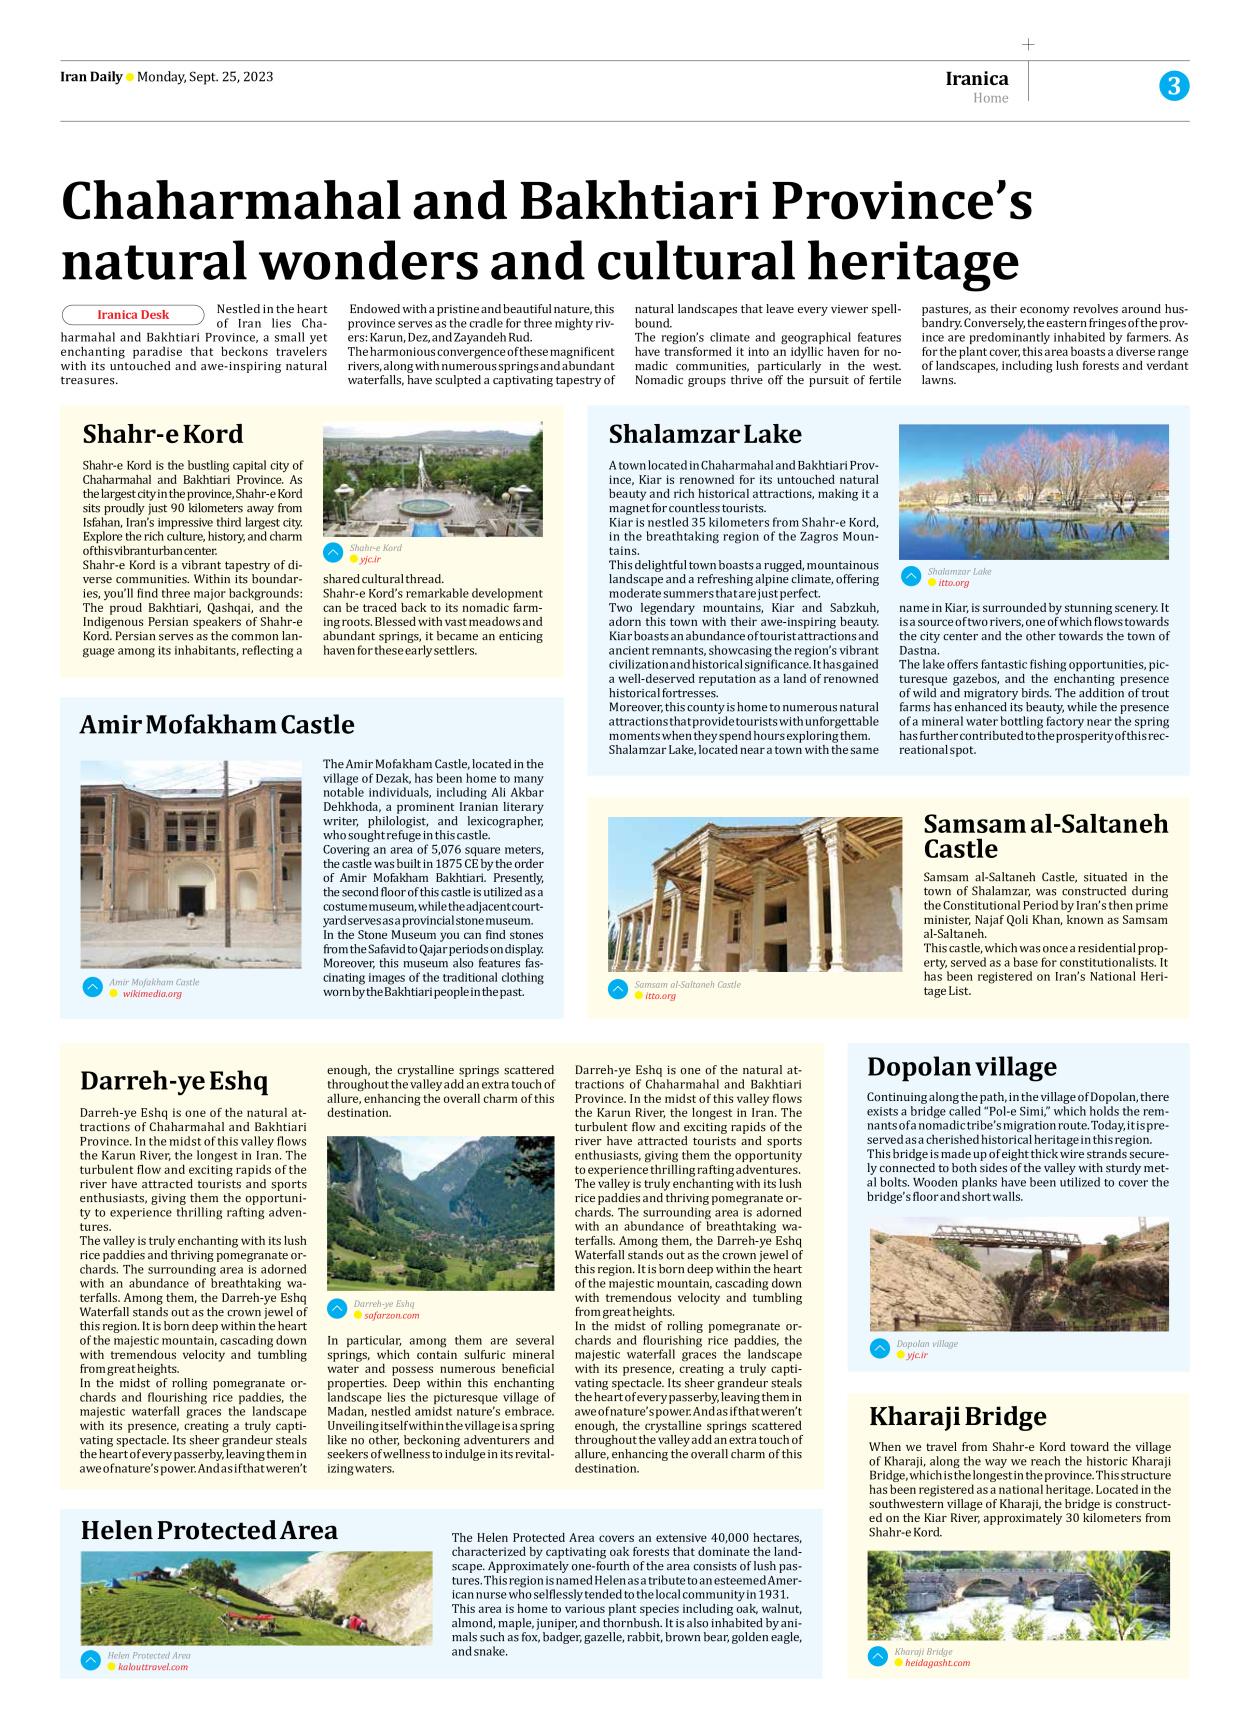 Iran Daily - Number Seven Thousand Three Hundred and Ninety Two - 25 September 2023 - Page 3